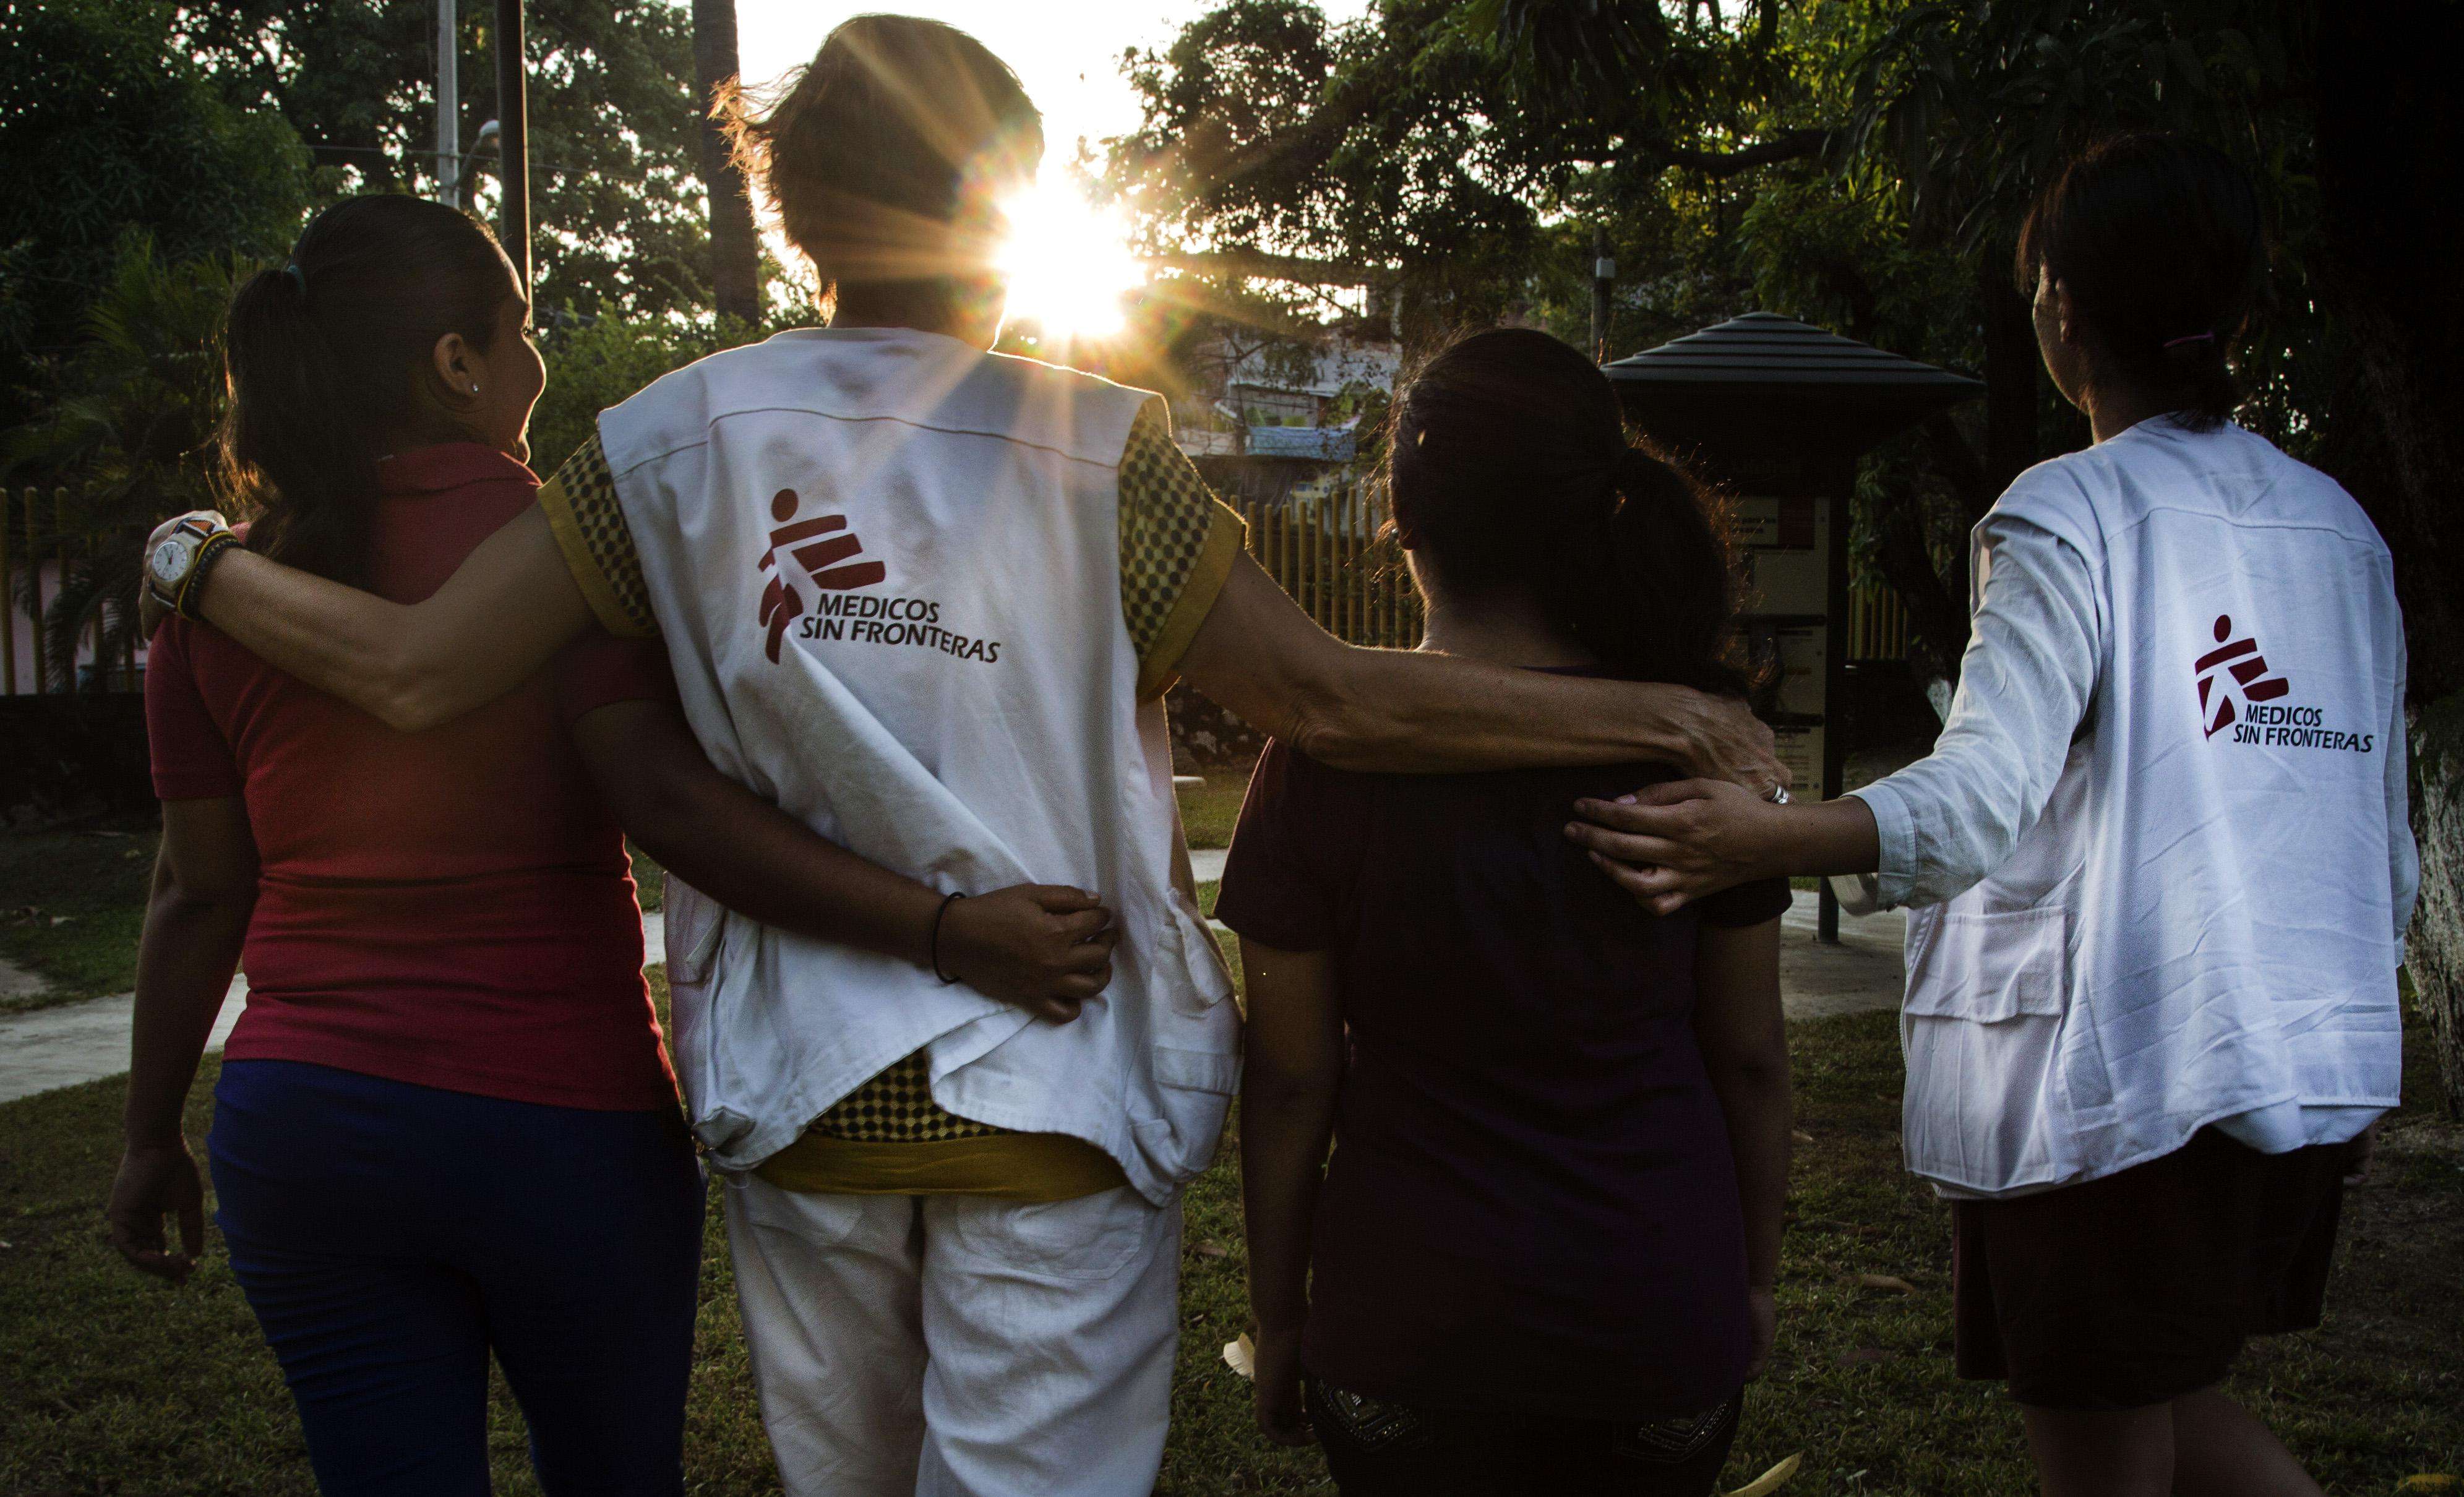 MSF counselors provide psychosocial care for survivors of sexual violence in Acapulco, Mexico.